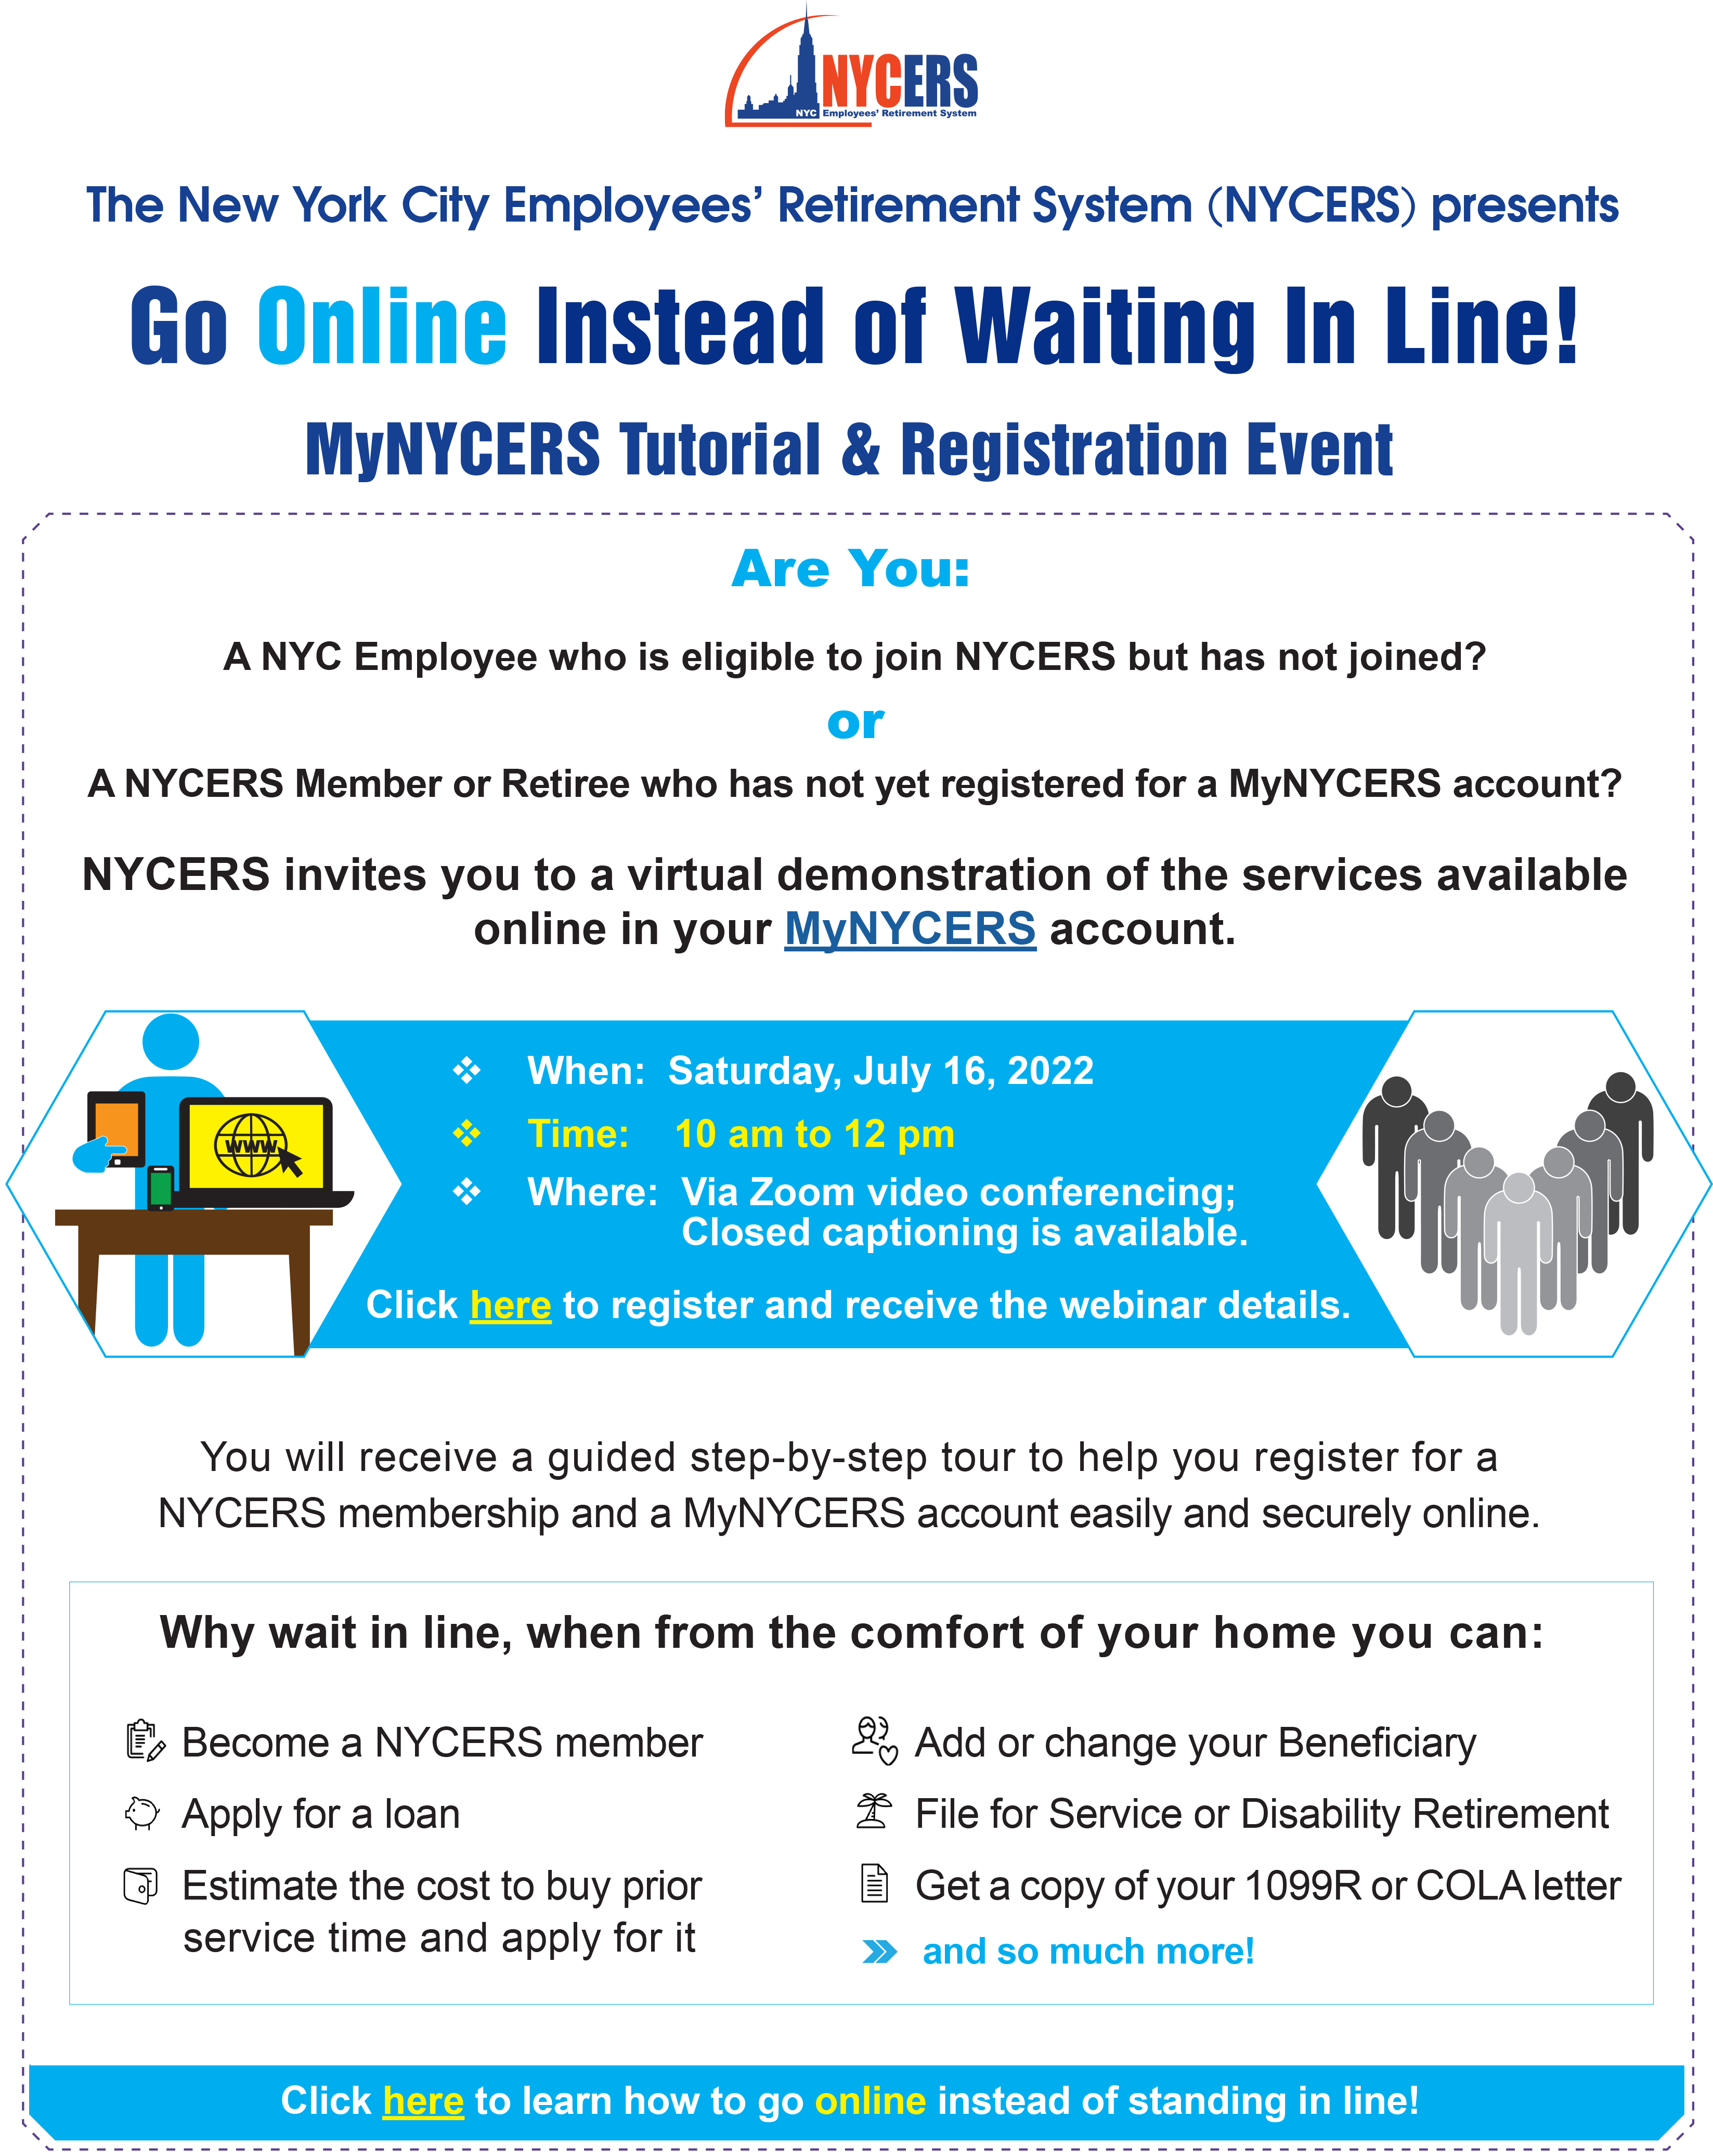 MyNYCERS Tutorial and Registration Event